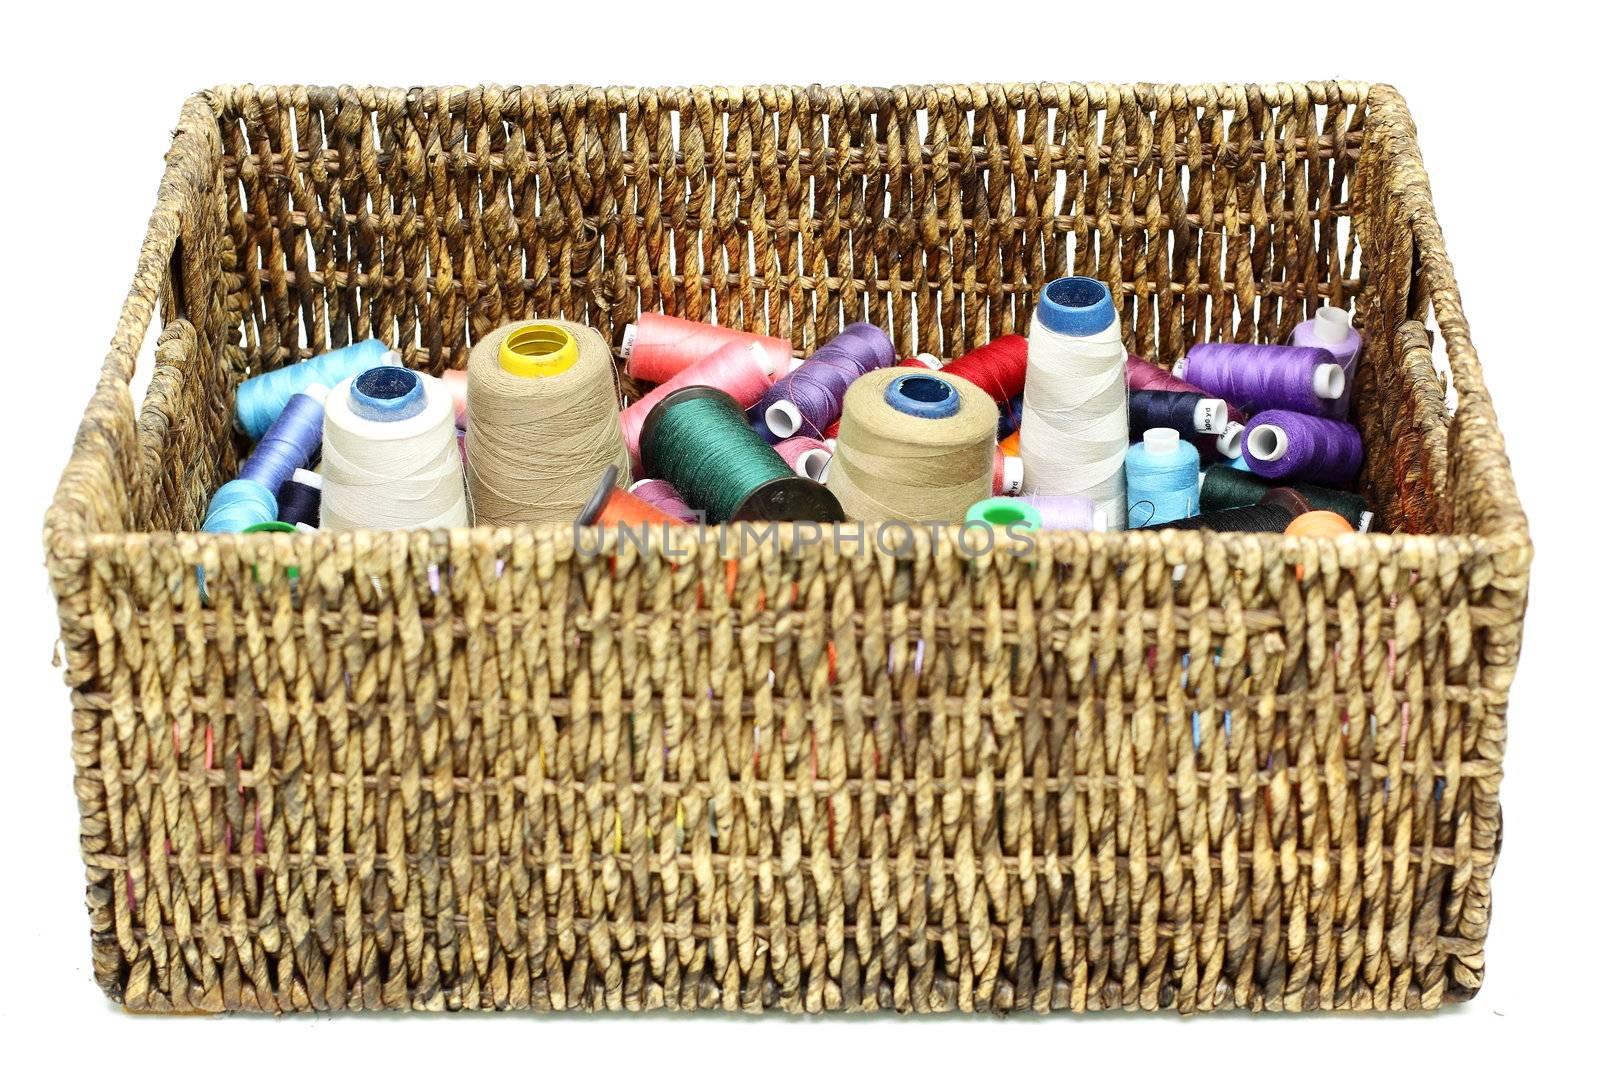 Many colorful spools of thread in the wicker baskets